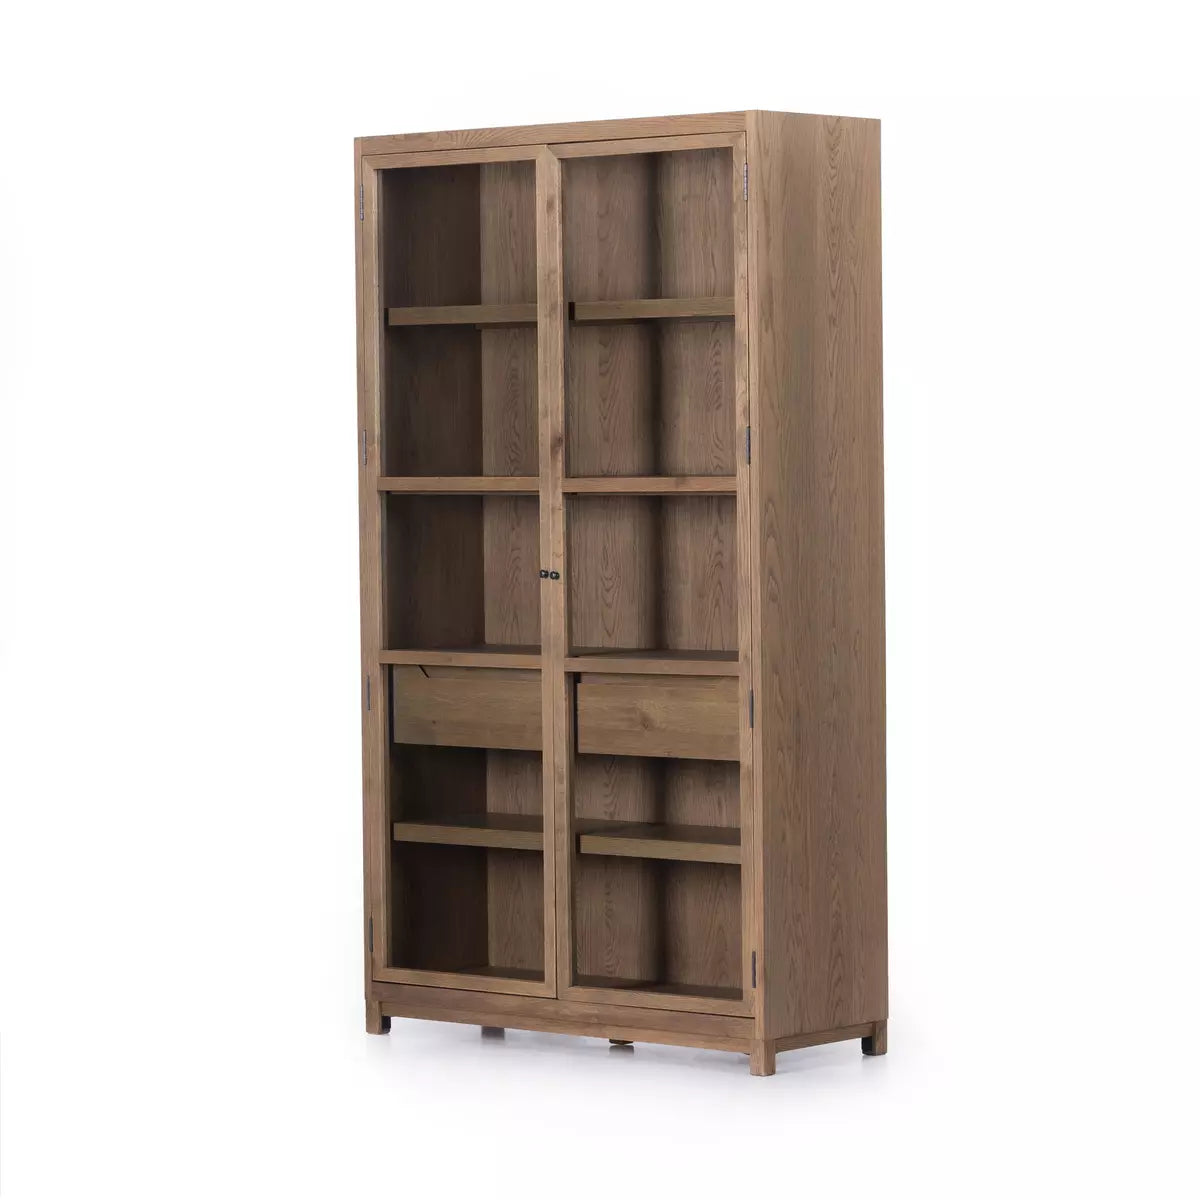 Molly Cabinet